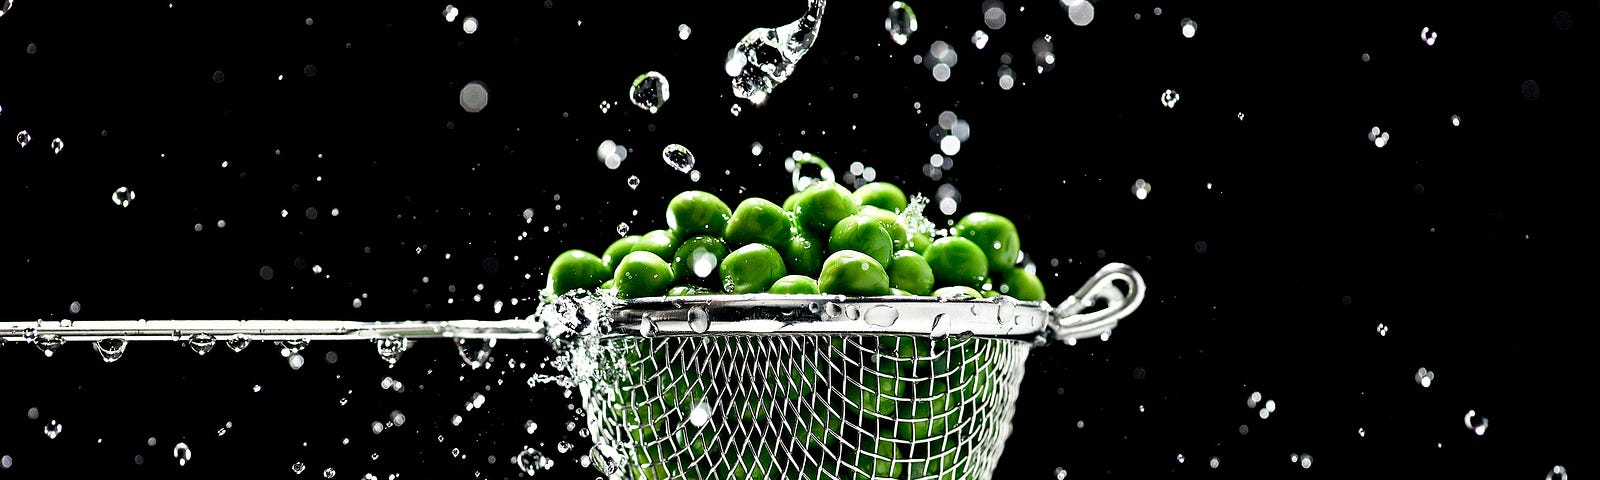 Strainer of fresh green peas and water droplets against black background.